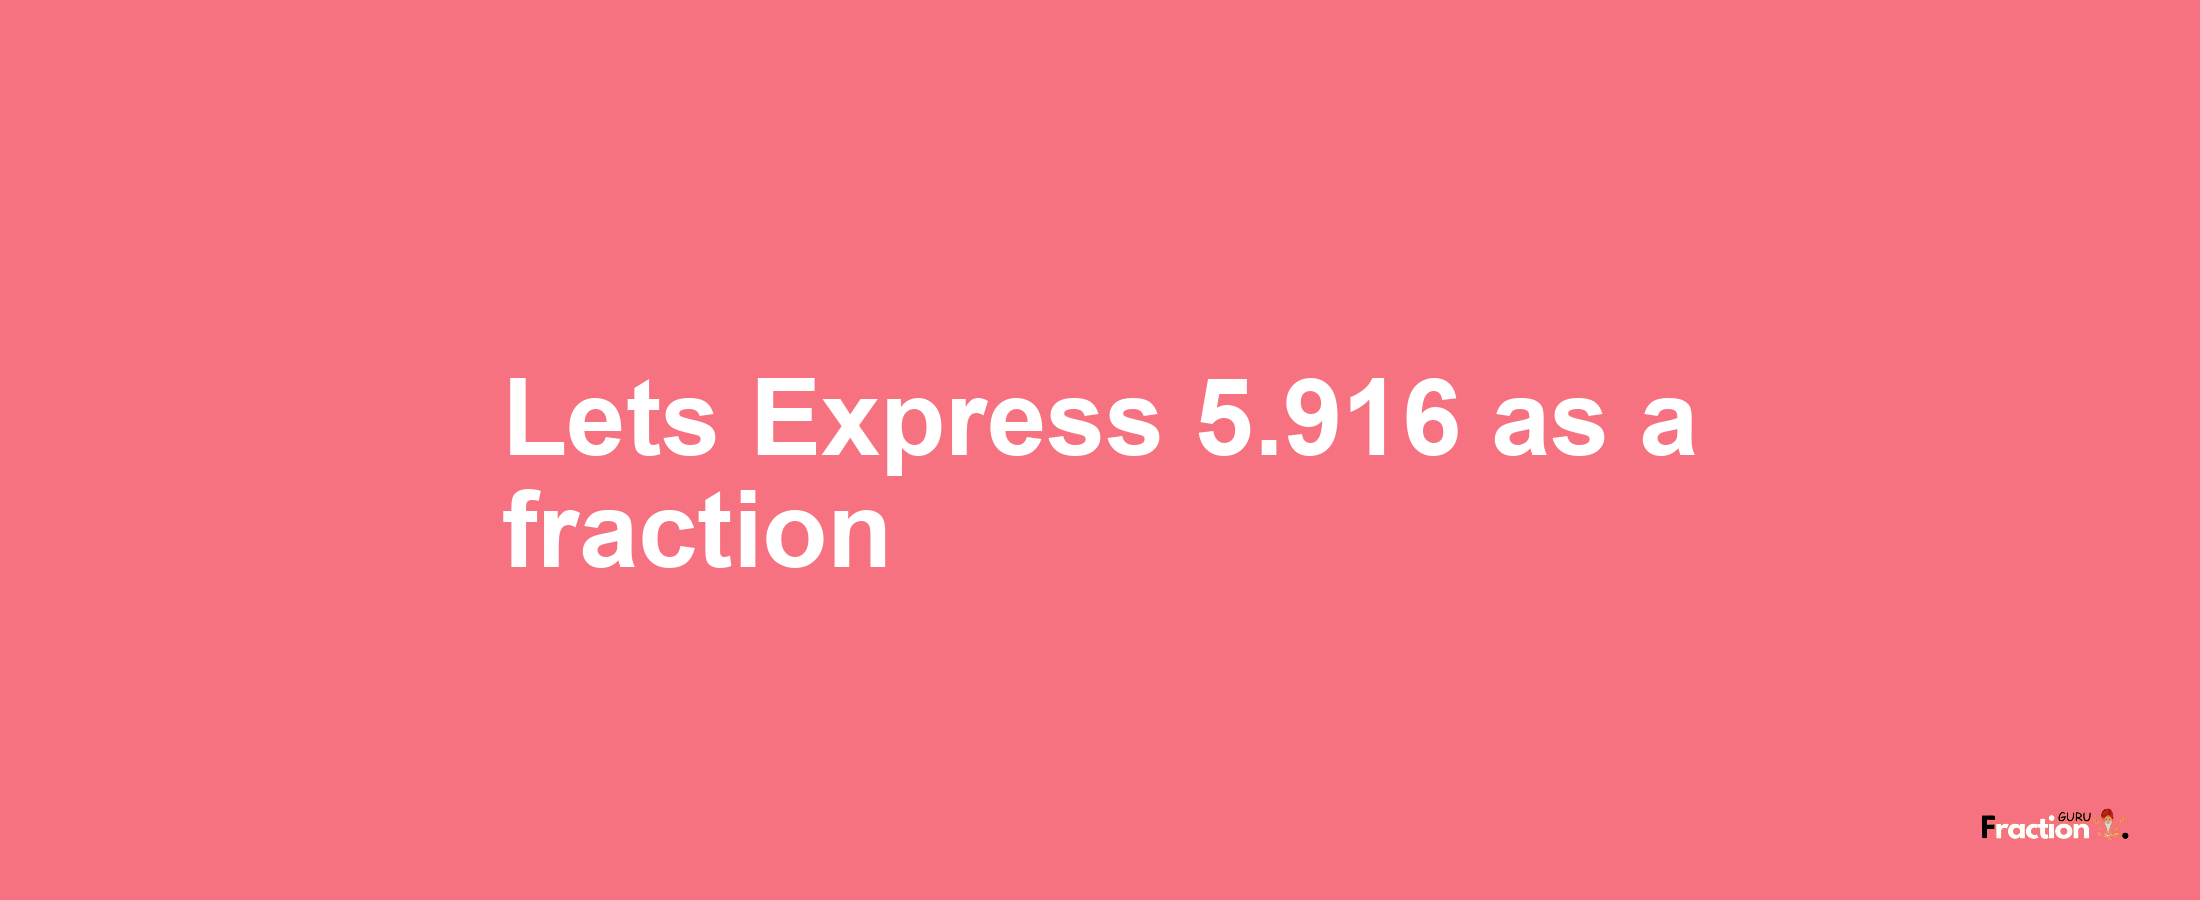 Lets Express 5.916 as afraction